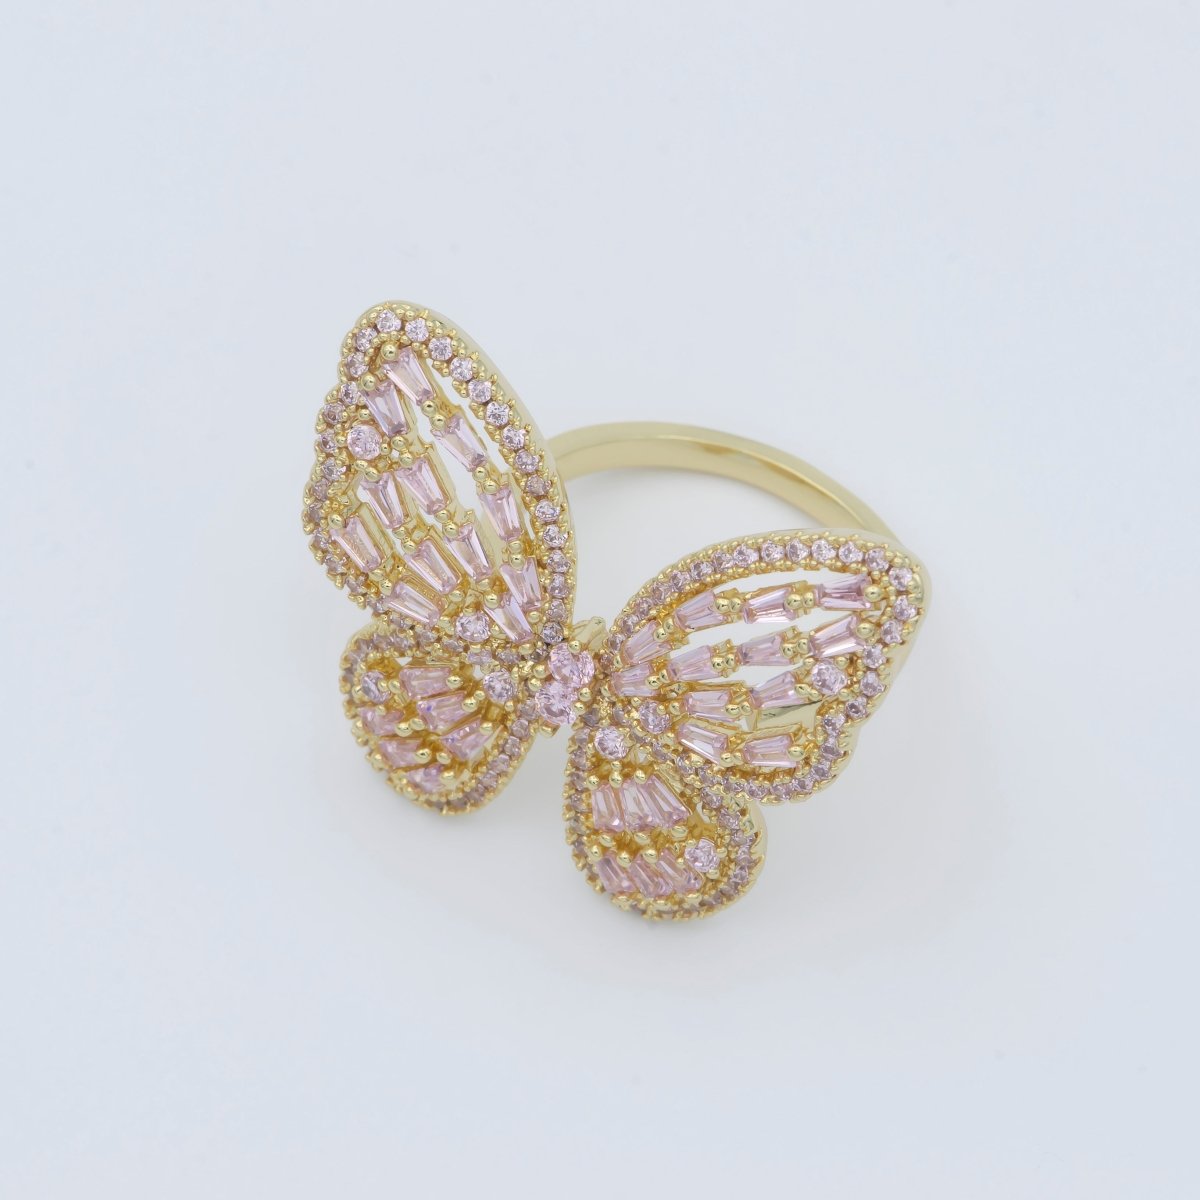 Gold butterfly ring, Open Adjustable butterfly ring, statement Jewelry with Cubic Zirconia Ring Mariposa Jewelry Inspired R-229 - DLUXCA